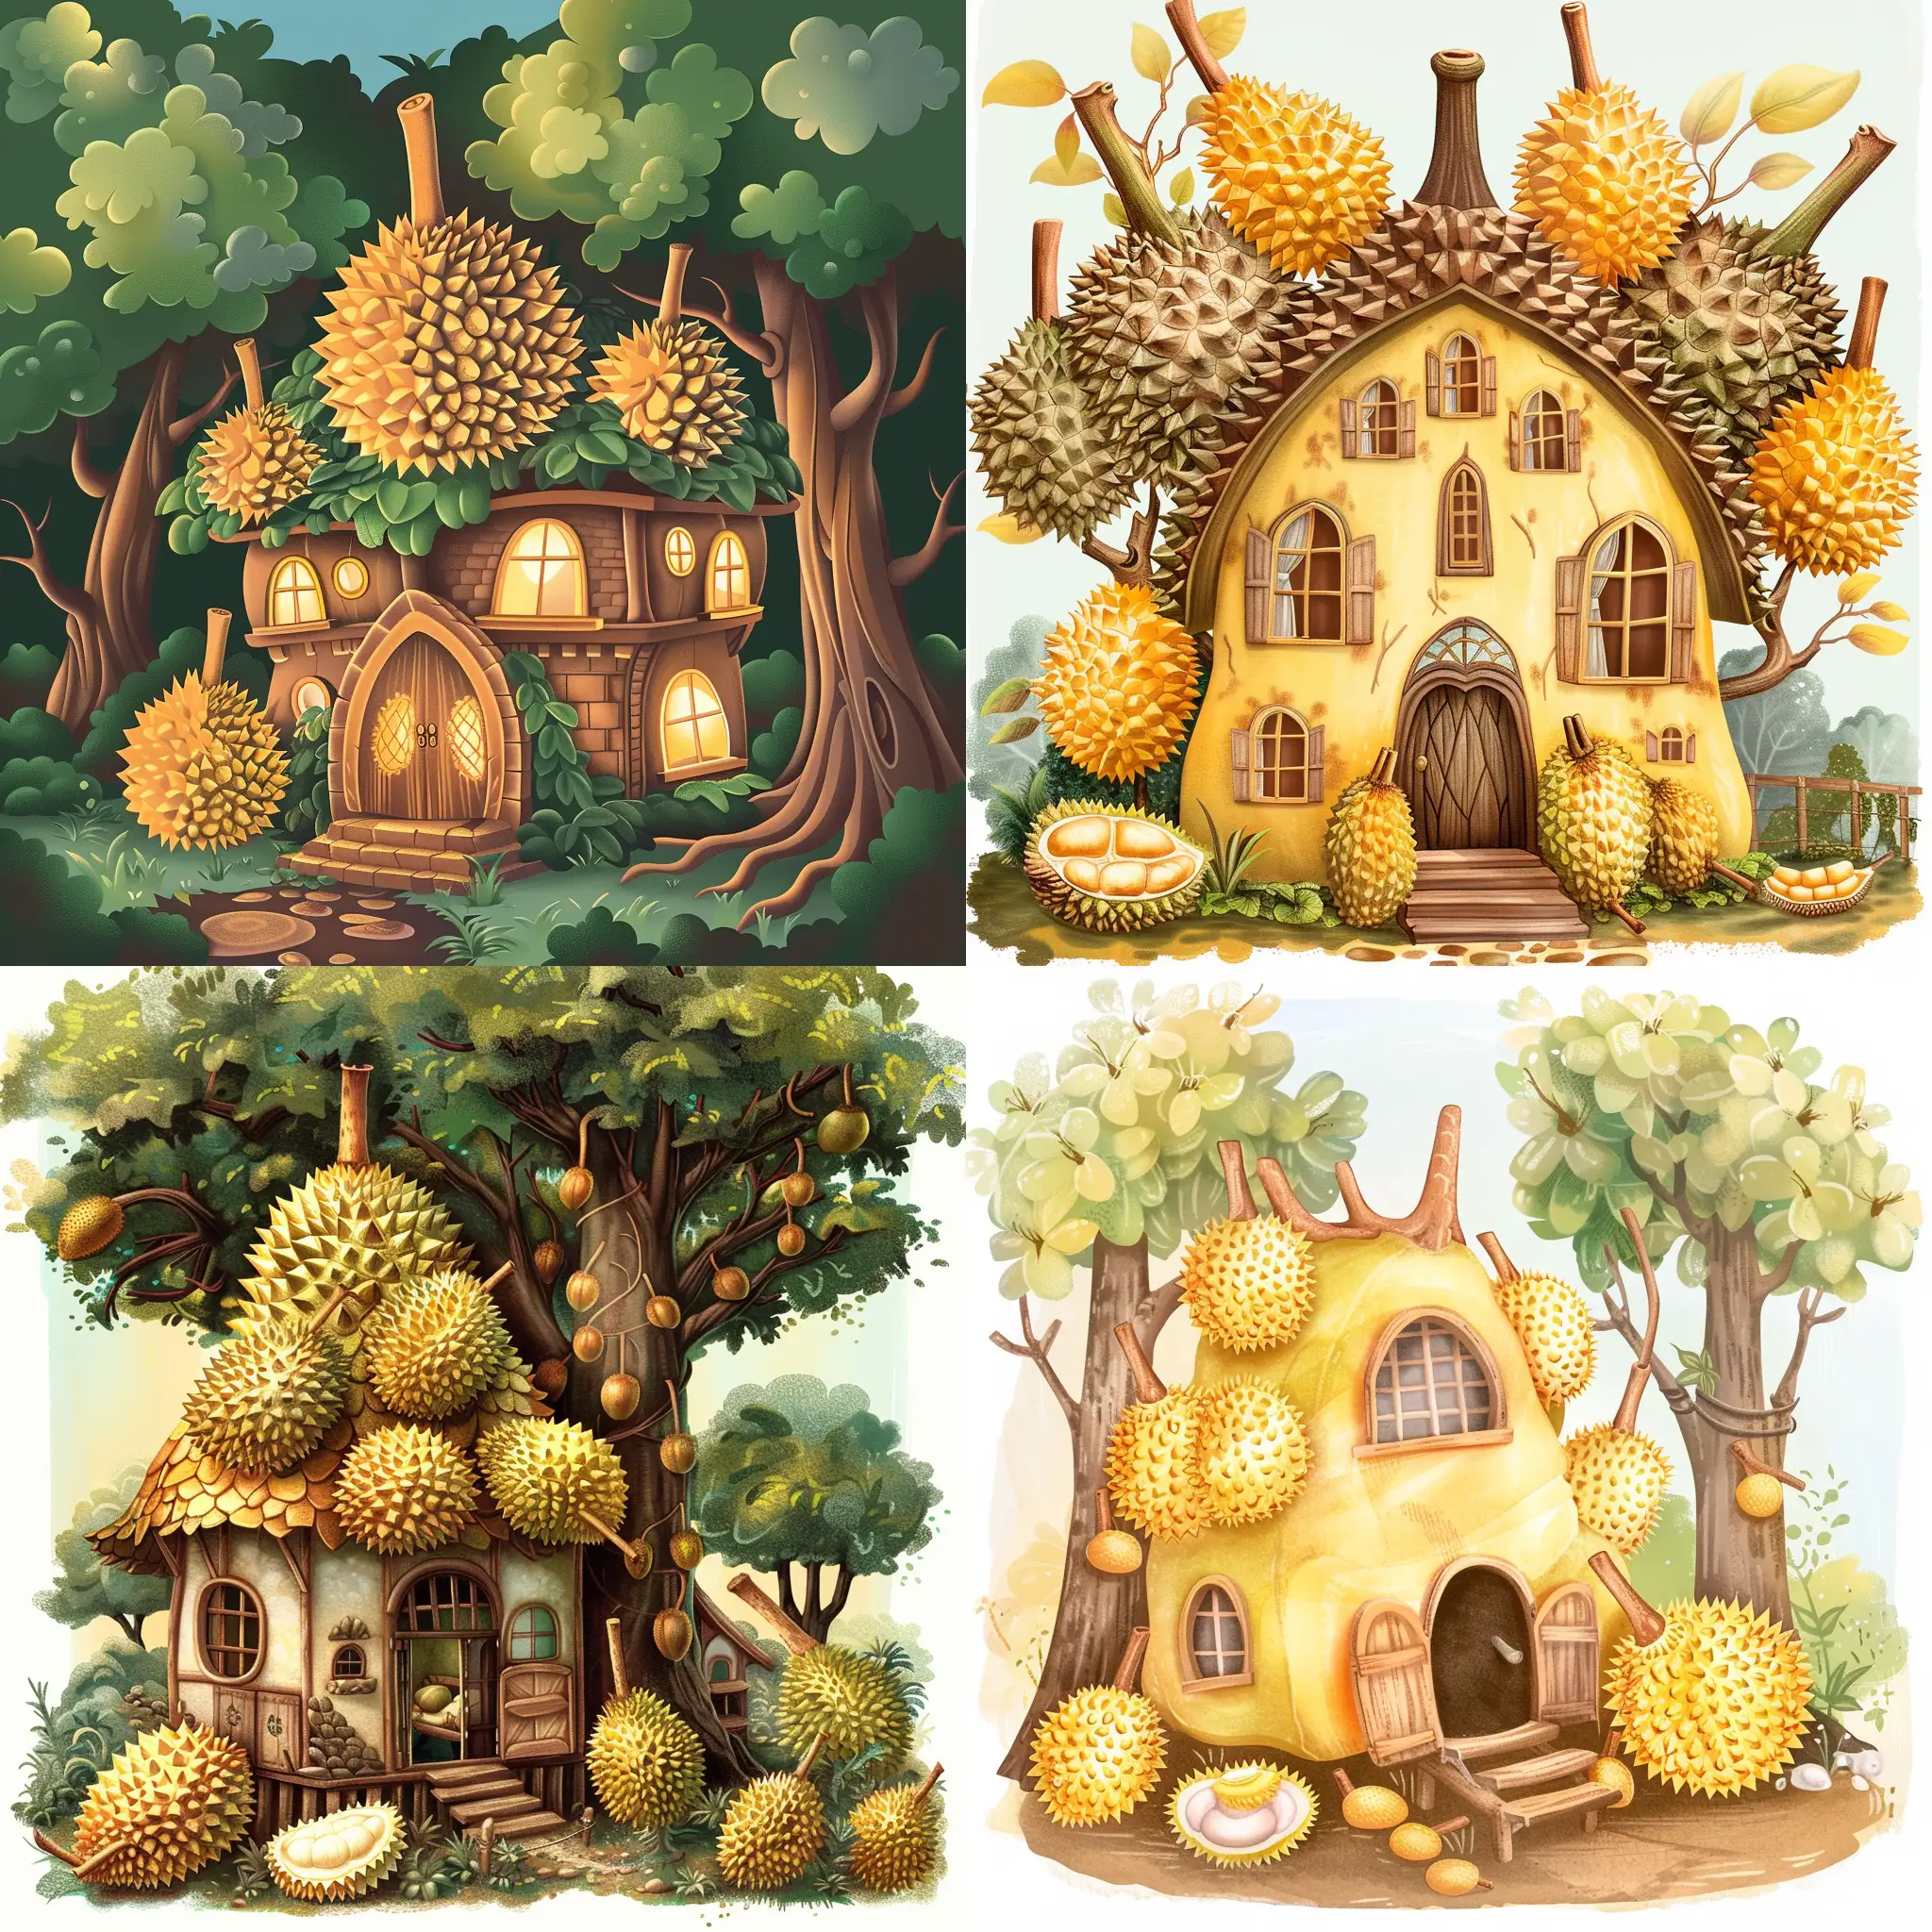 Enchanted-Durian-House-Illustration-in-Magical-Forest